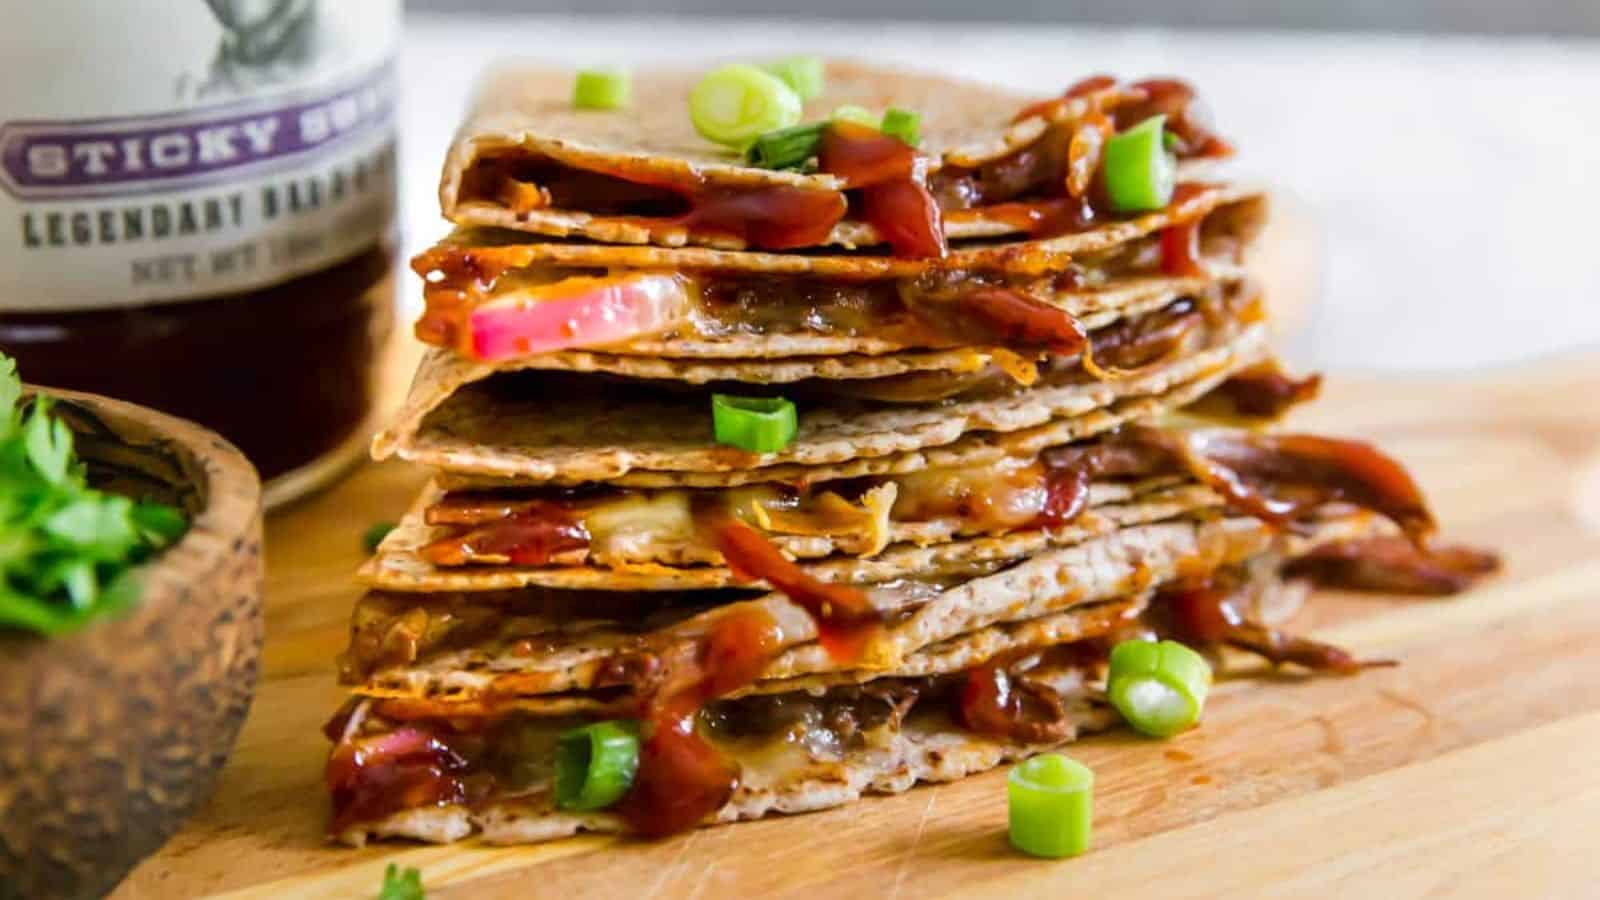 A stack of brisket quesadillas placed on a wooden board.